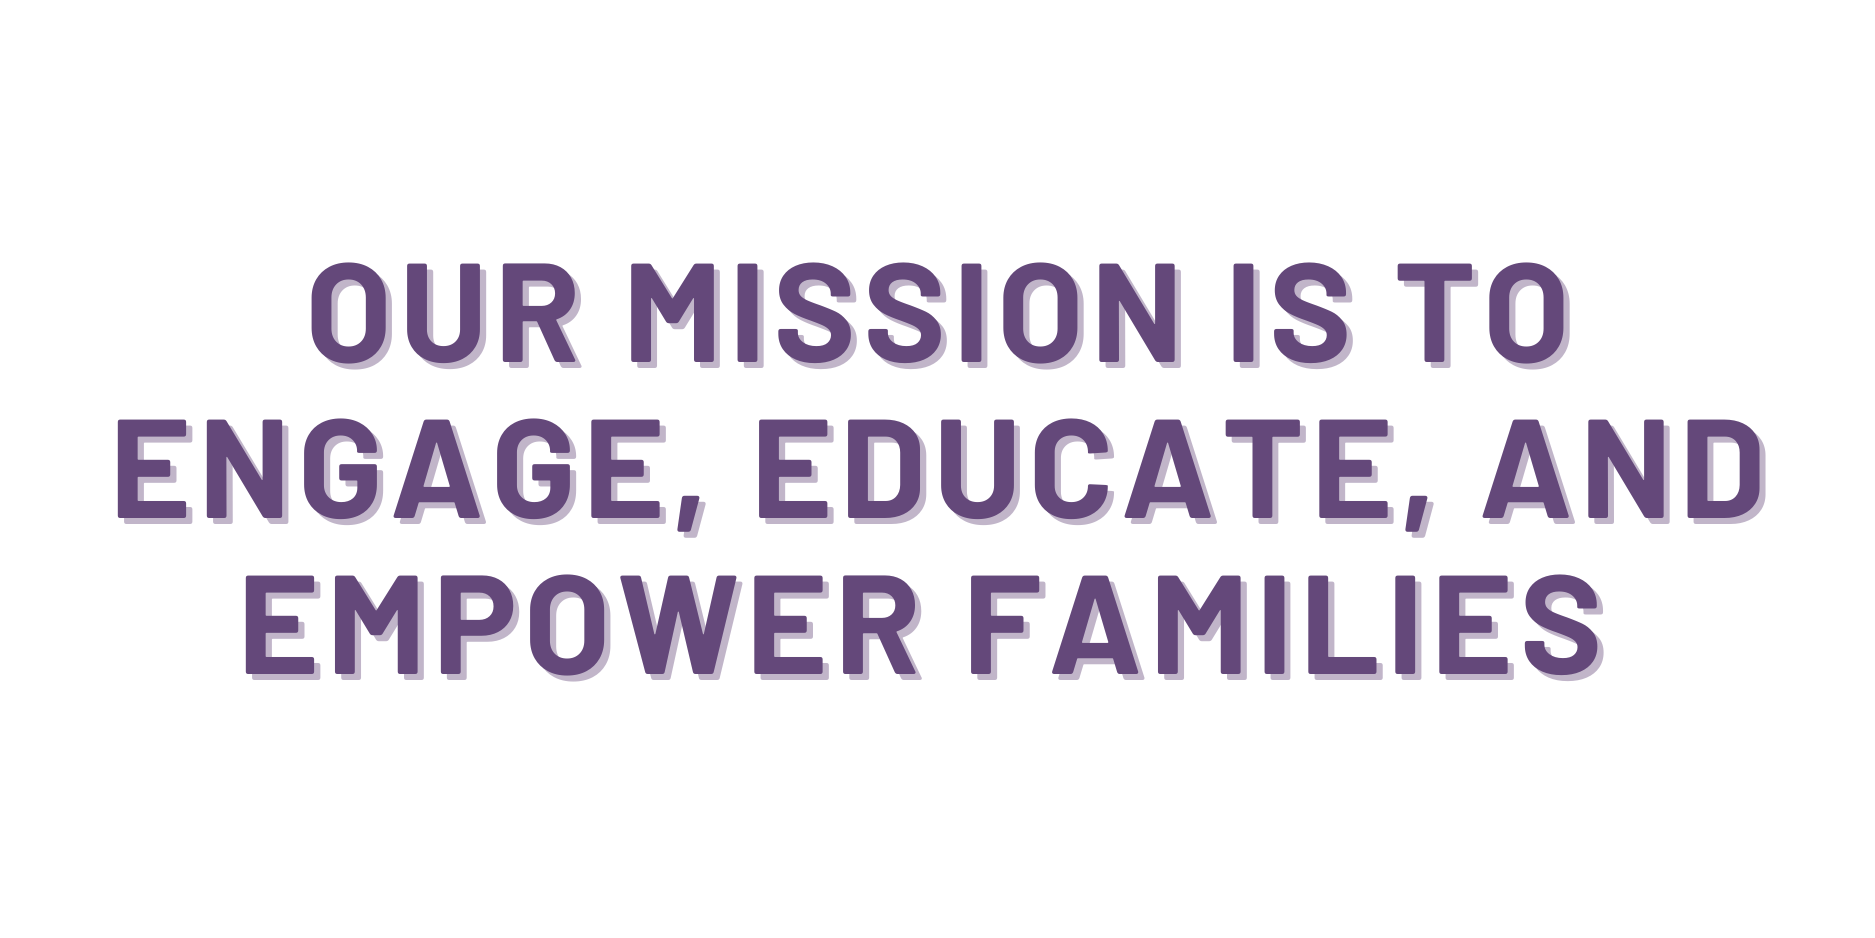 Our mission is to engage, educate, and empower families